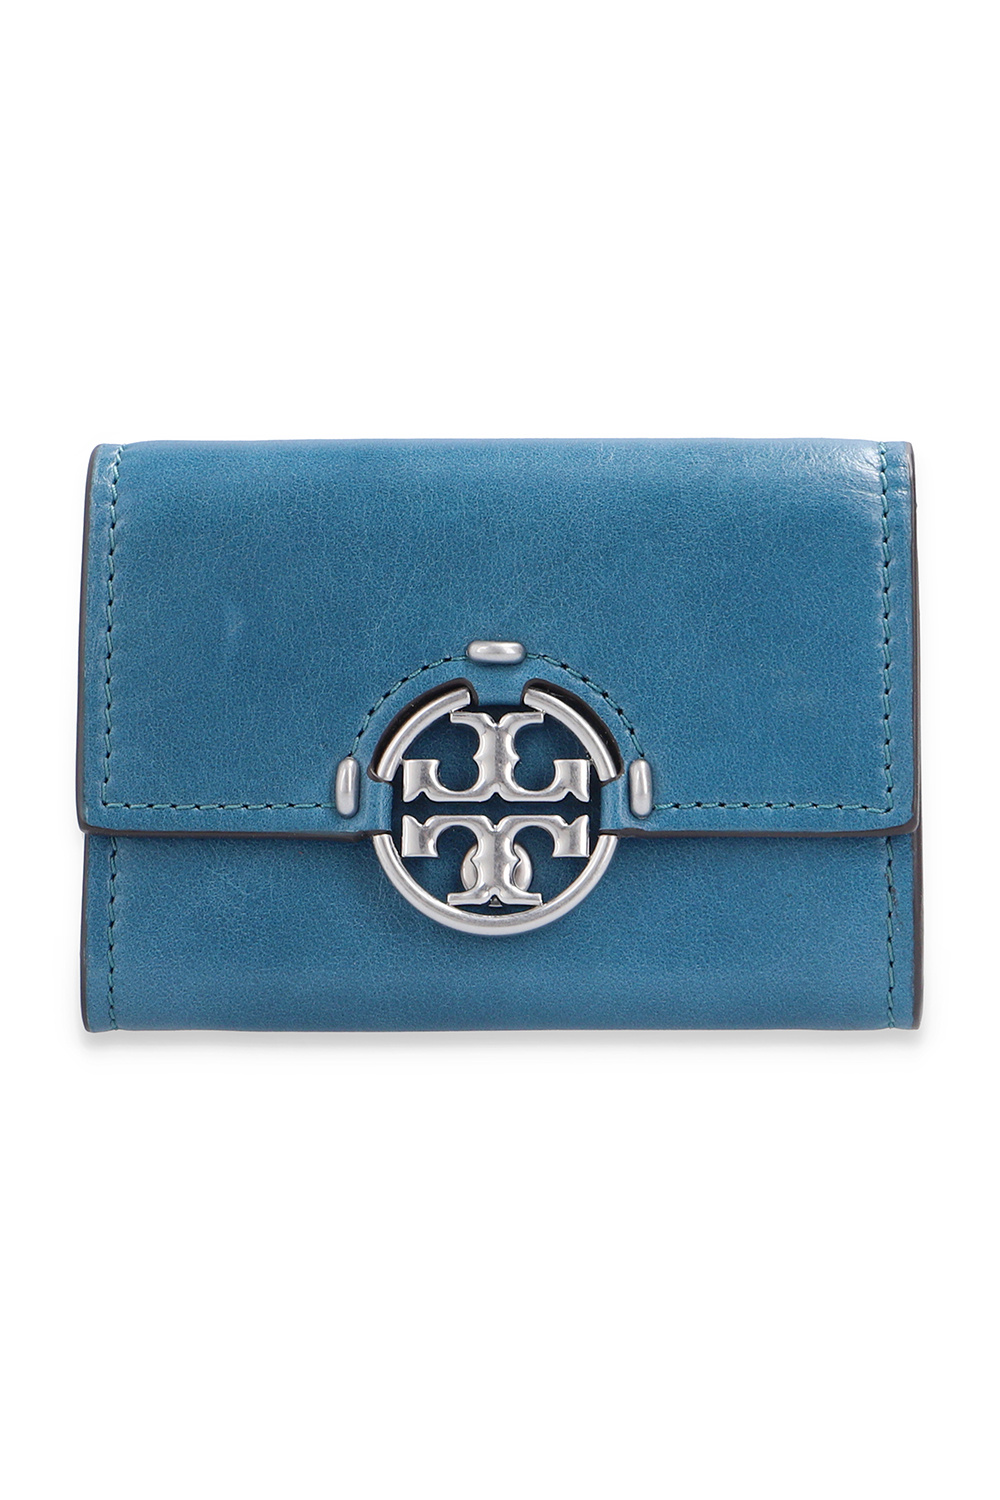 Tory Burch Lets keep in touch